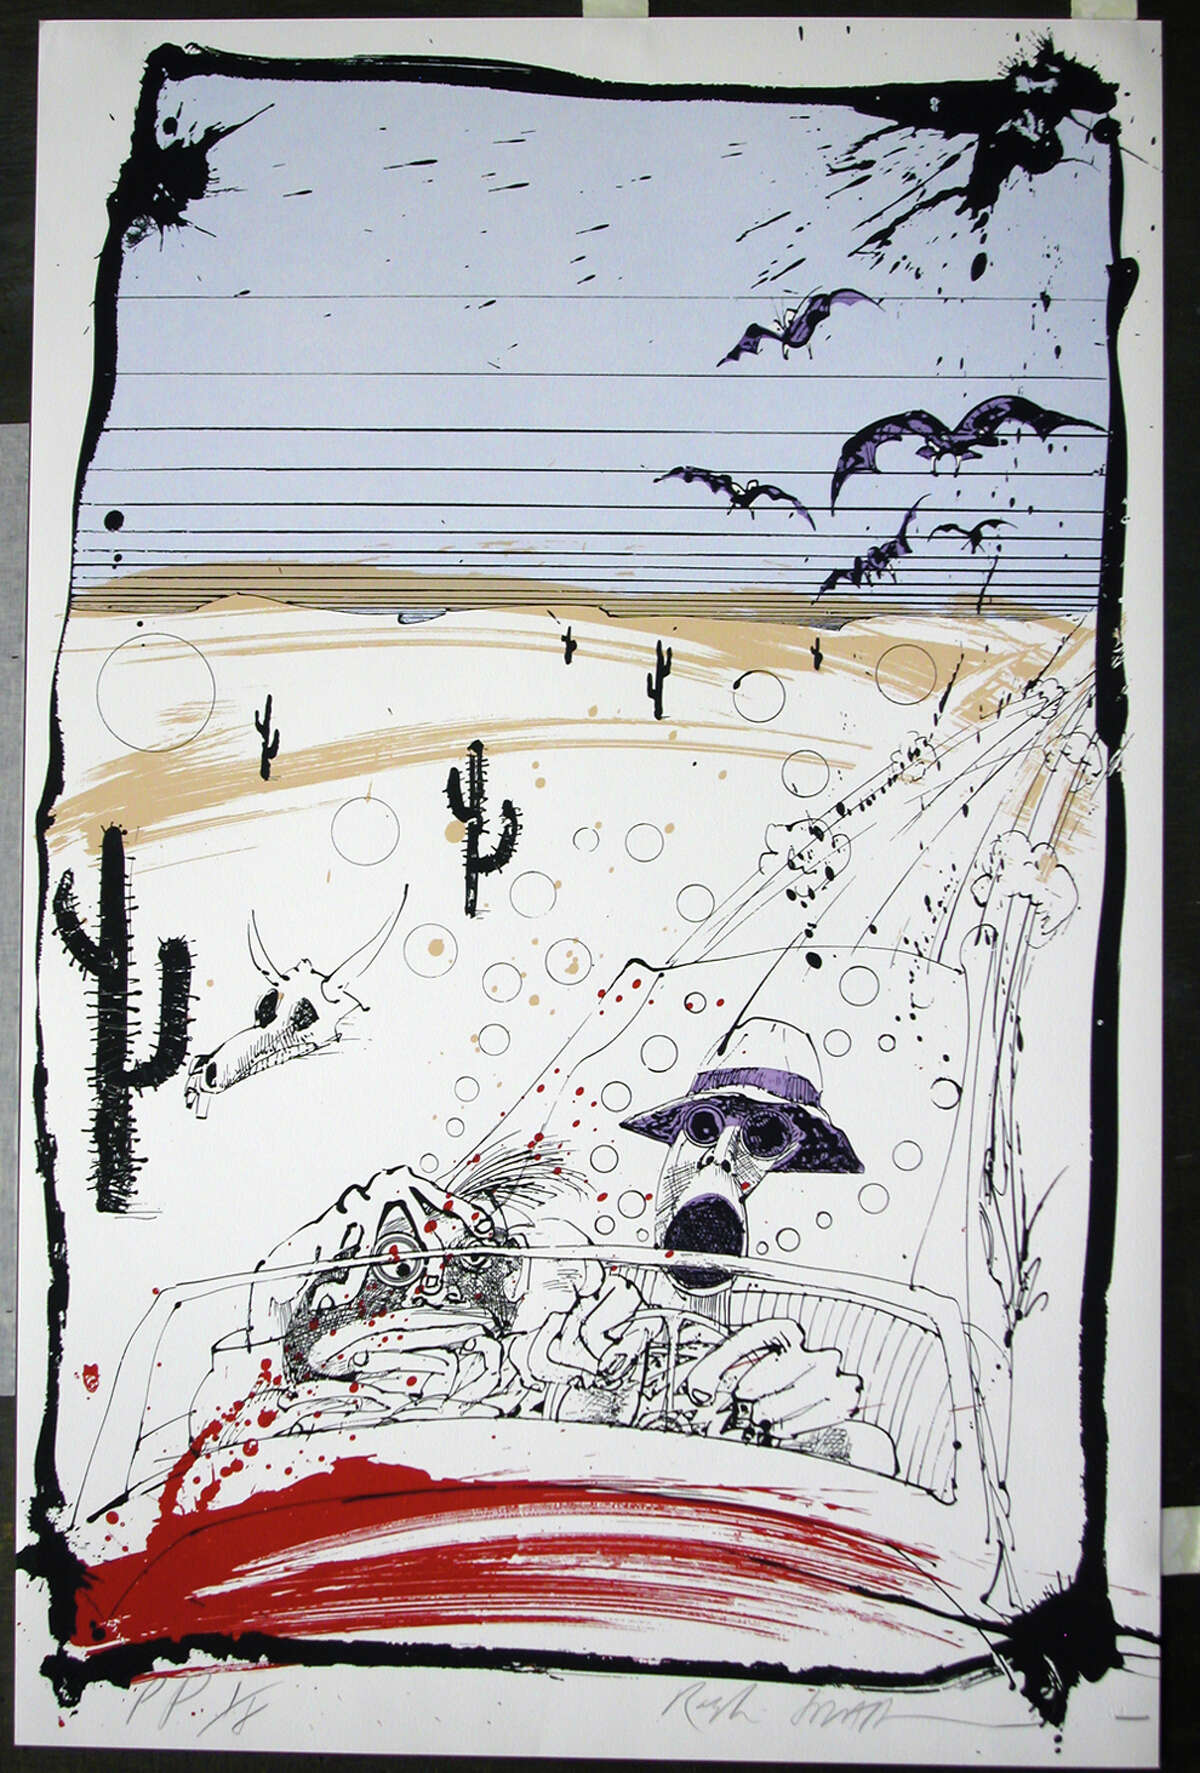 Artist Ralph Steadman is best known for his work illustrating the writings of Hunter S. Thompson. Artist Ralph Steadman is best known for his work illustrating the writings of Hunter S. Thompson.